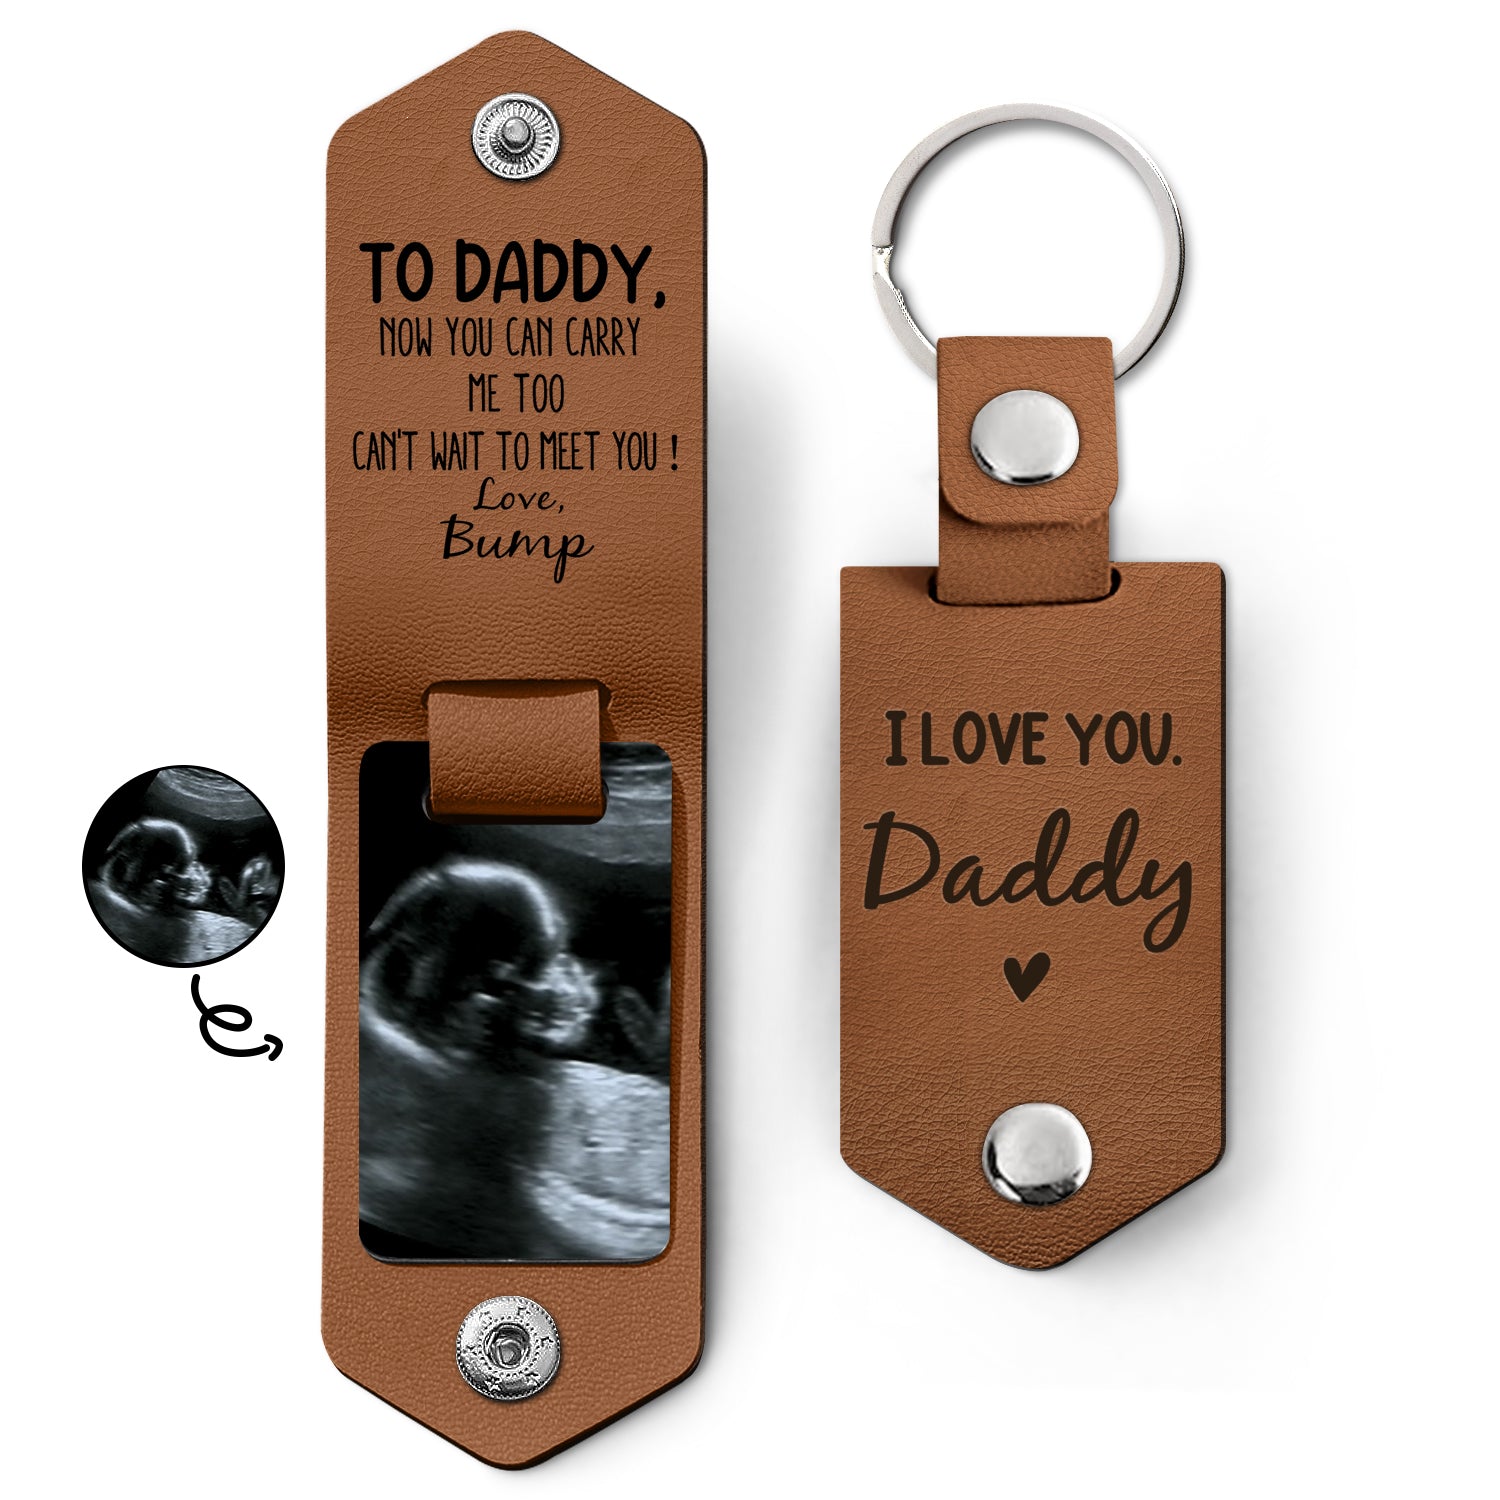 Custom Photo Now You Can Carry Me Too - Gift For Dad, Father, New Parents - Personalized Leather Photo Keychain